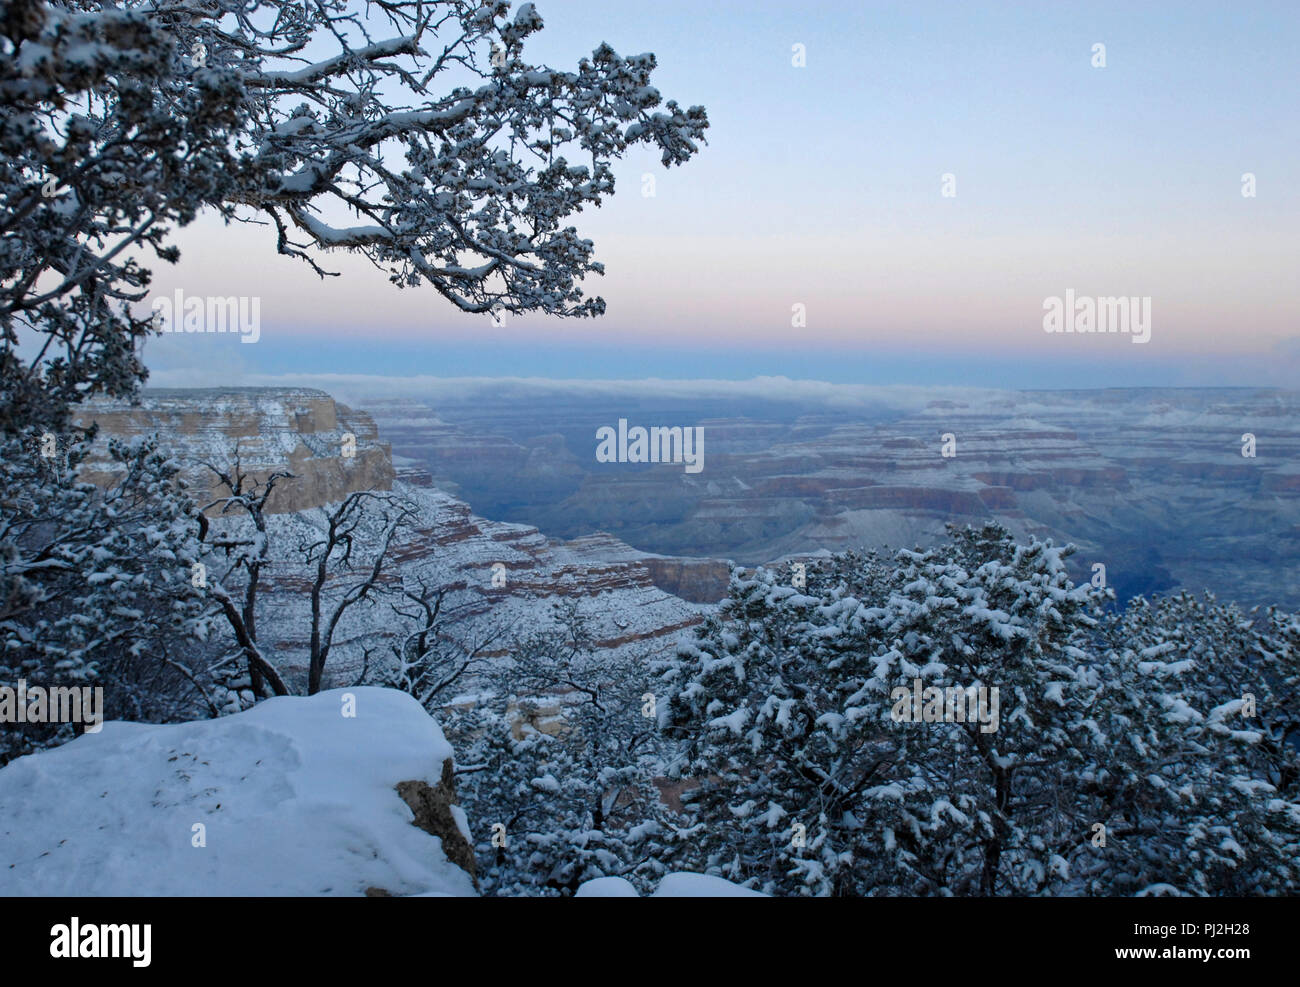 Dawn at Yavapai Point at Grand Canyon National Park in Arizona following a winter storm that left the South Rim covered in snow. Stock Photo